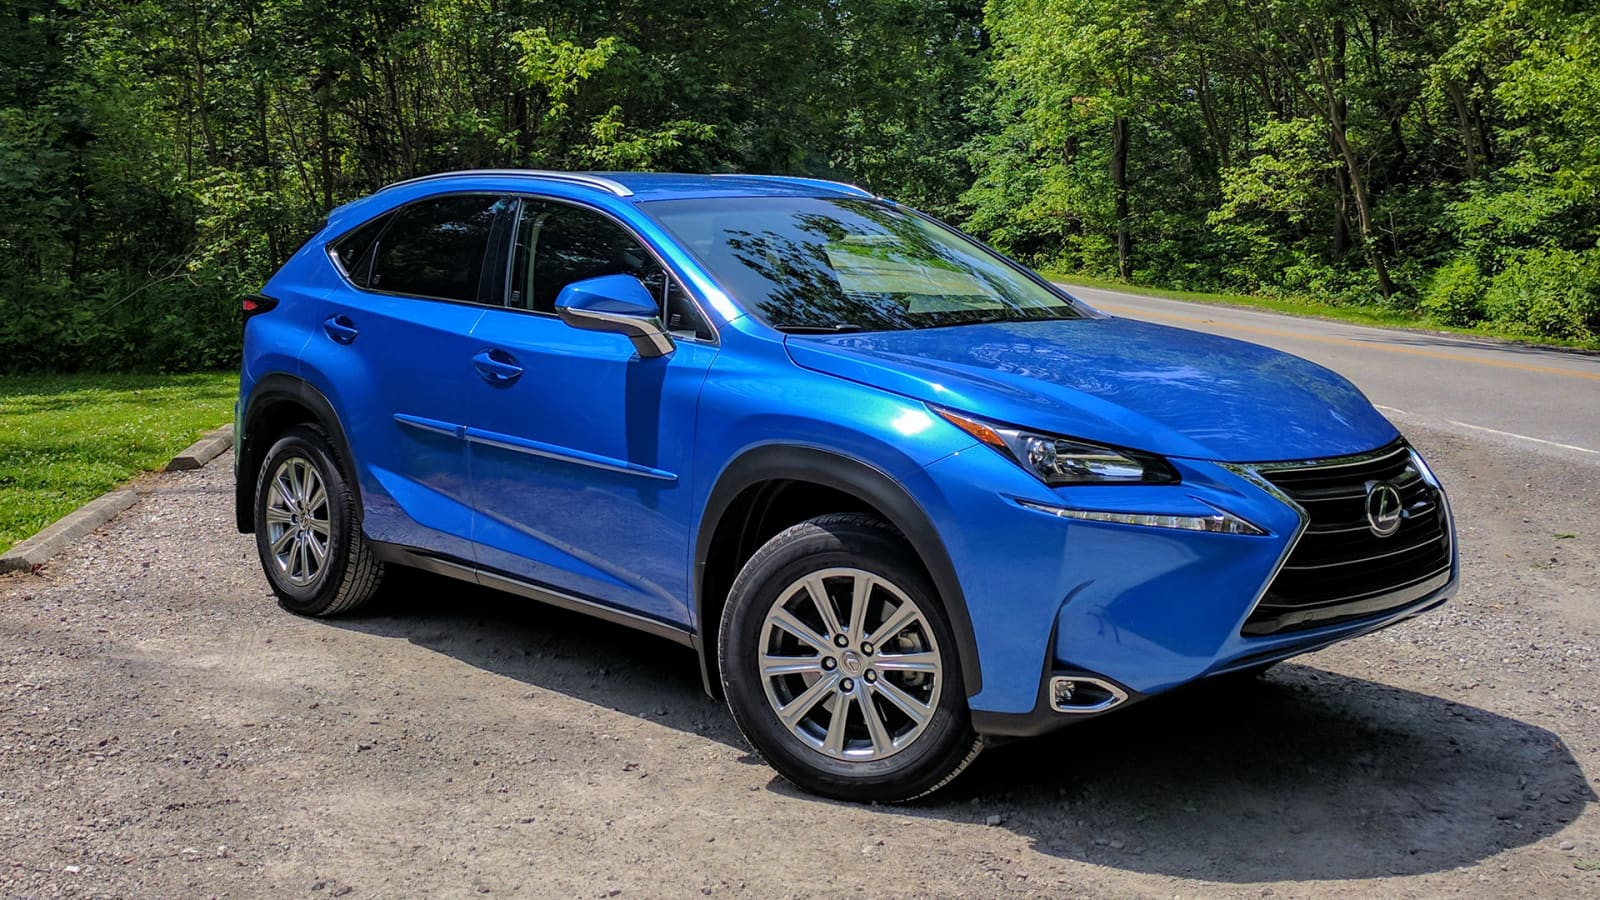 2017 Lexus NX200t review: best value in subcompact luxury SUV segment